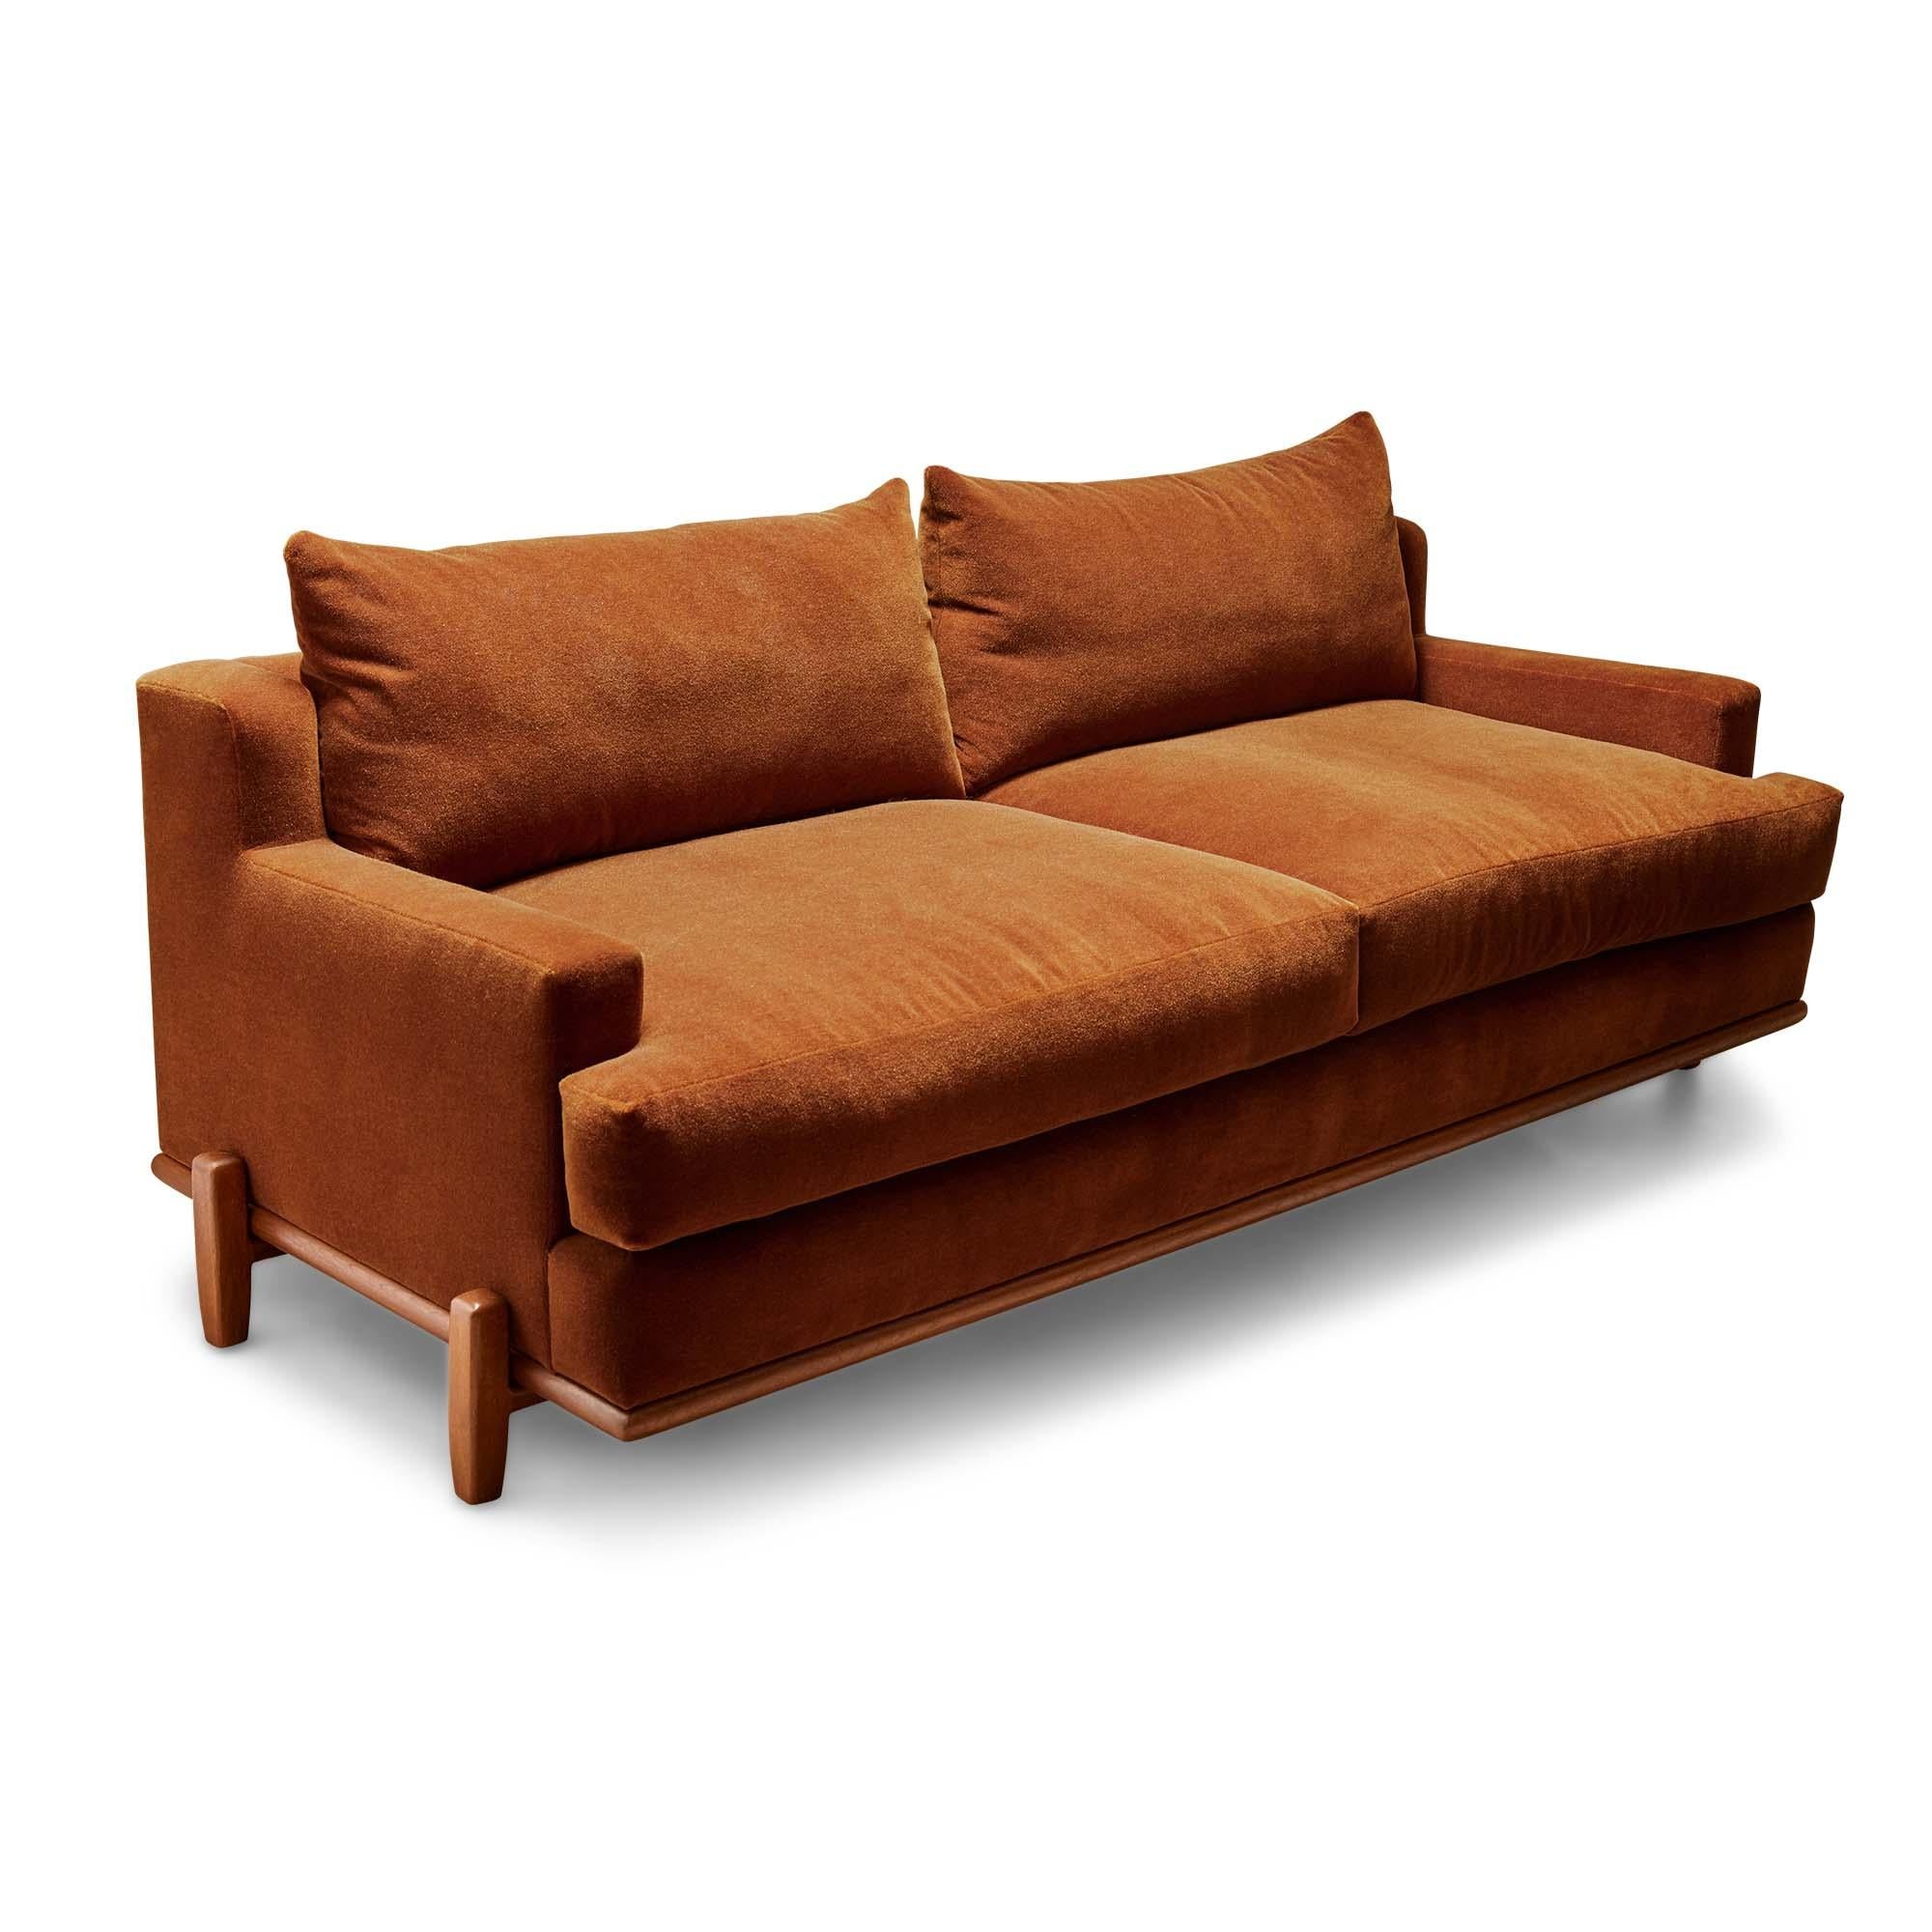 The George sofa is part of the collaborative collection with interior designer Brian Paquette. The low profile silhouette sits above a sculpted solid wood base. This piece is available in exclusive BP for LF finishes as well as the standard